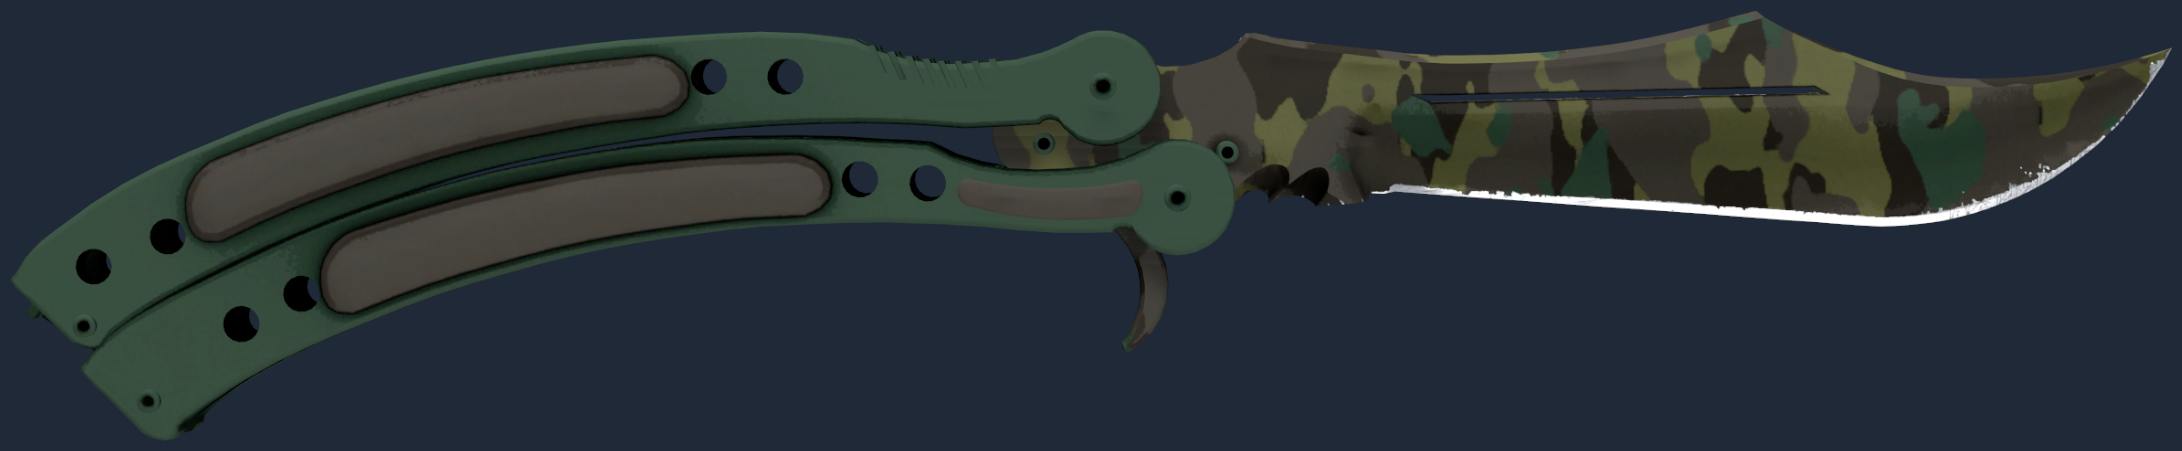 ★ Butterfly Knife | Boreal Forest Screenshot